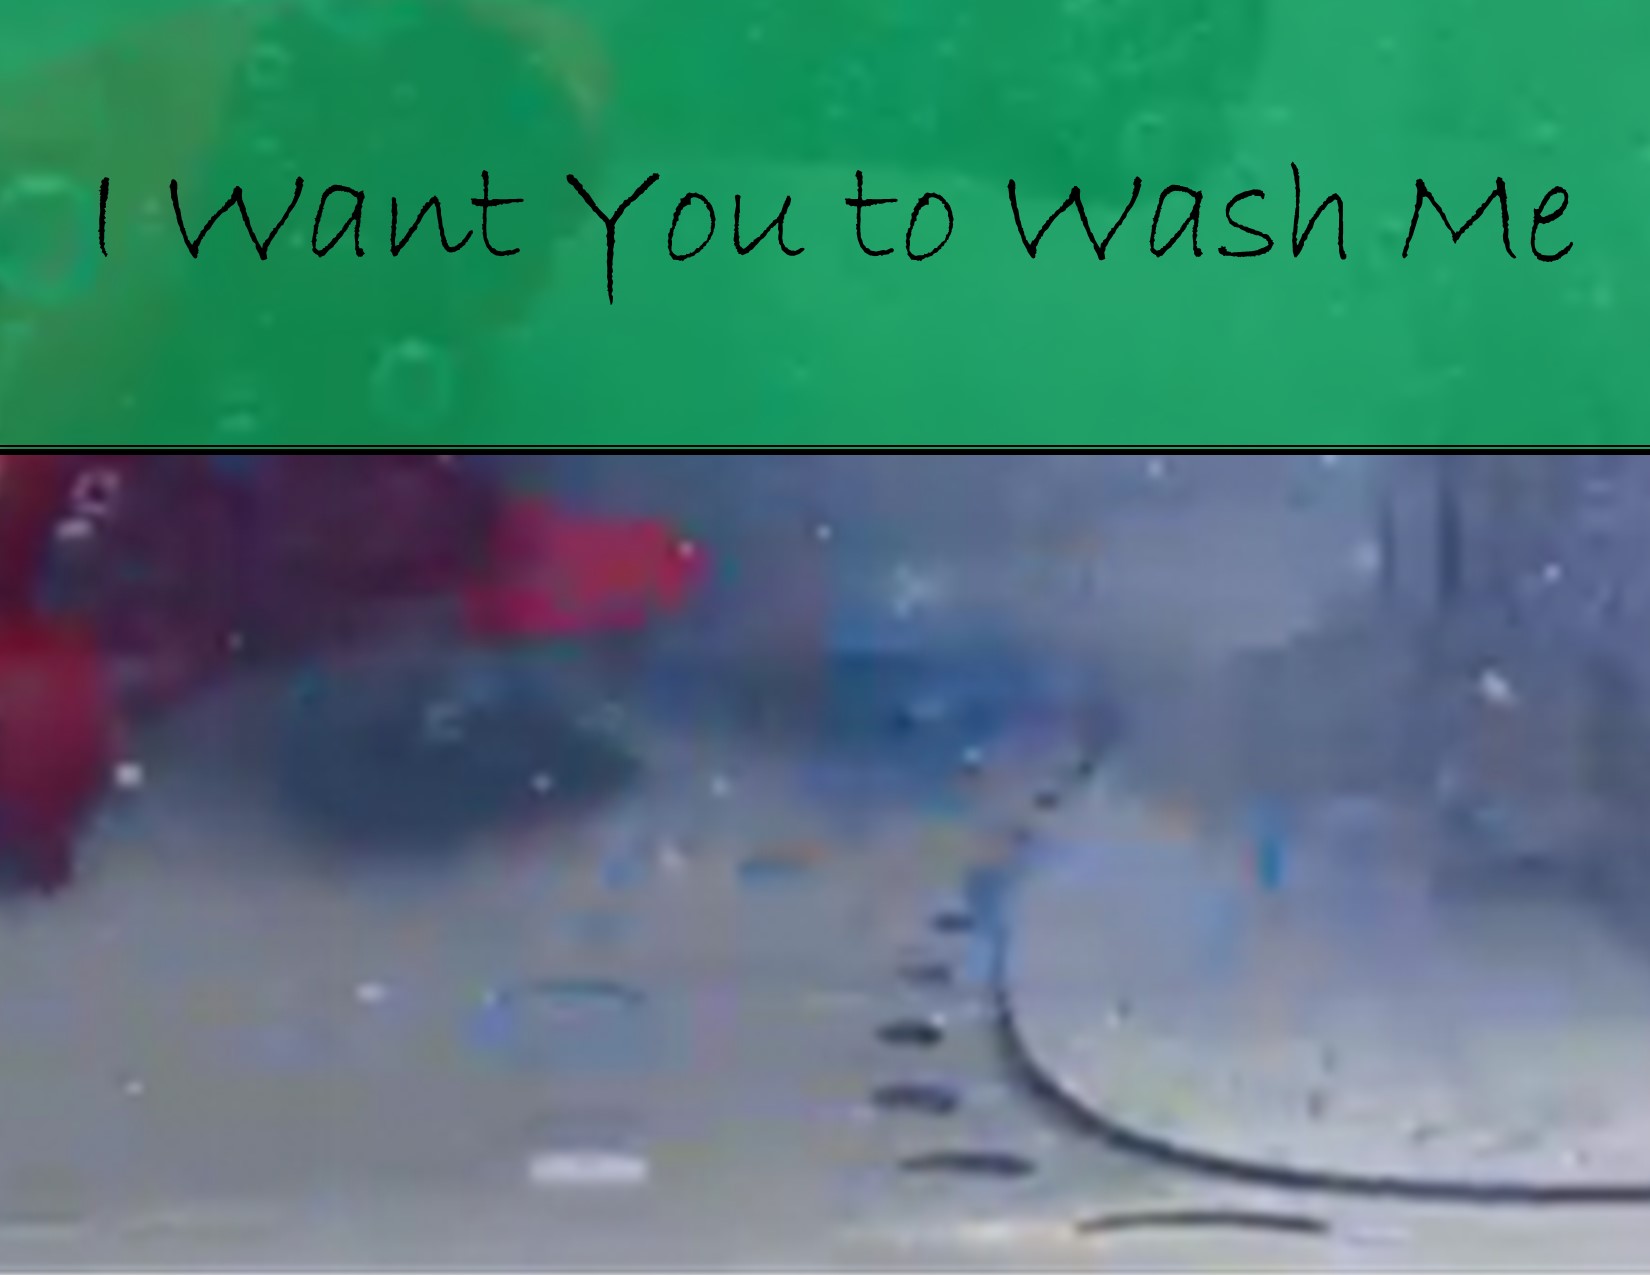 I Want You to Wash Me (thank you, Cheap Trick!)